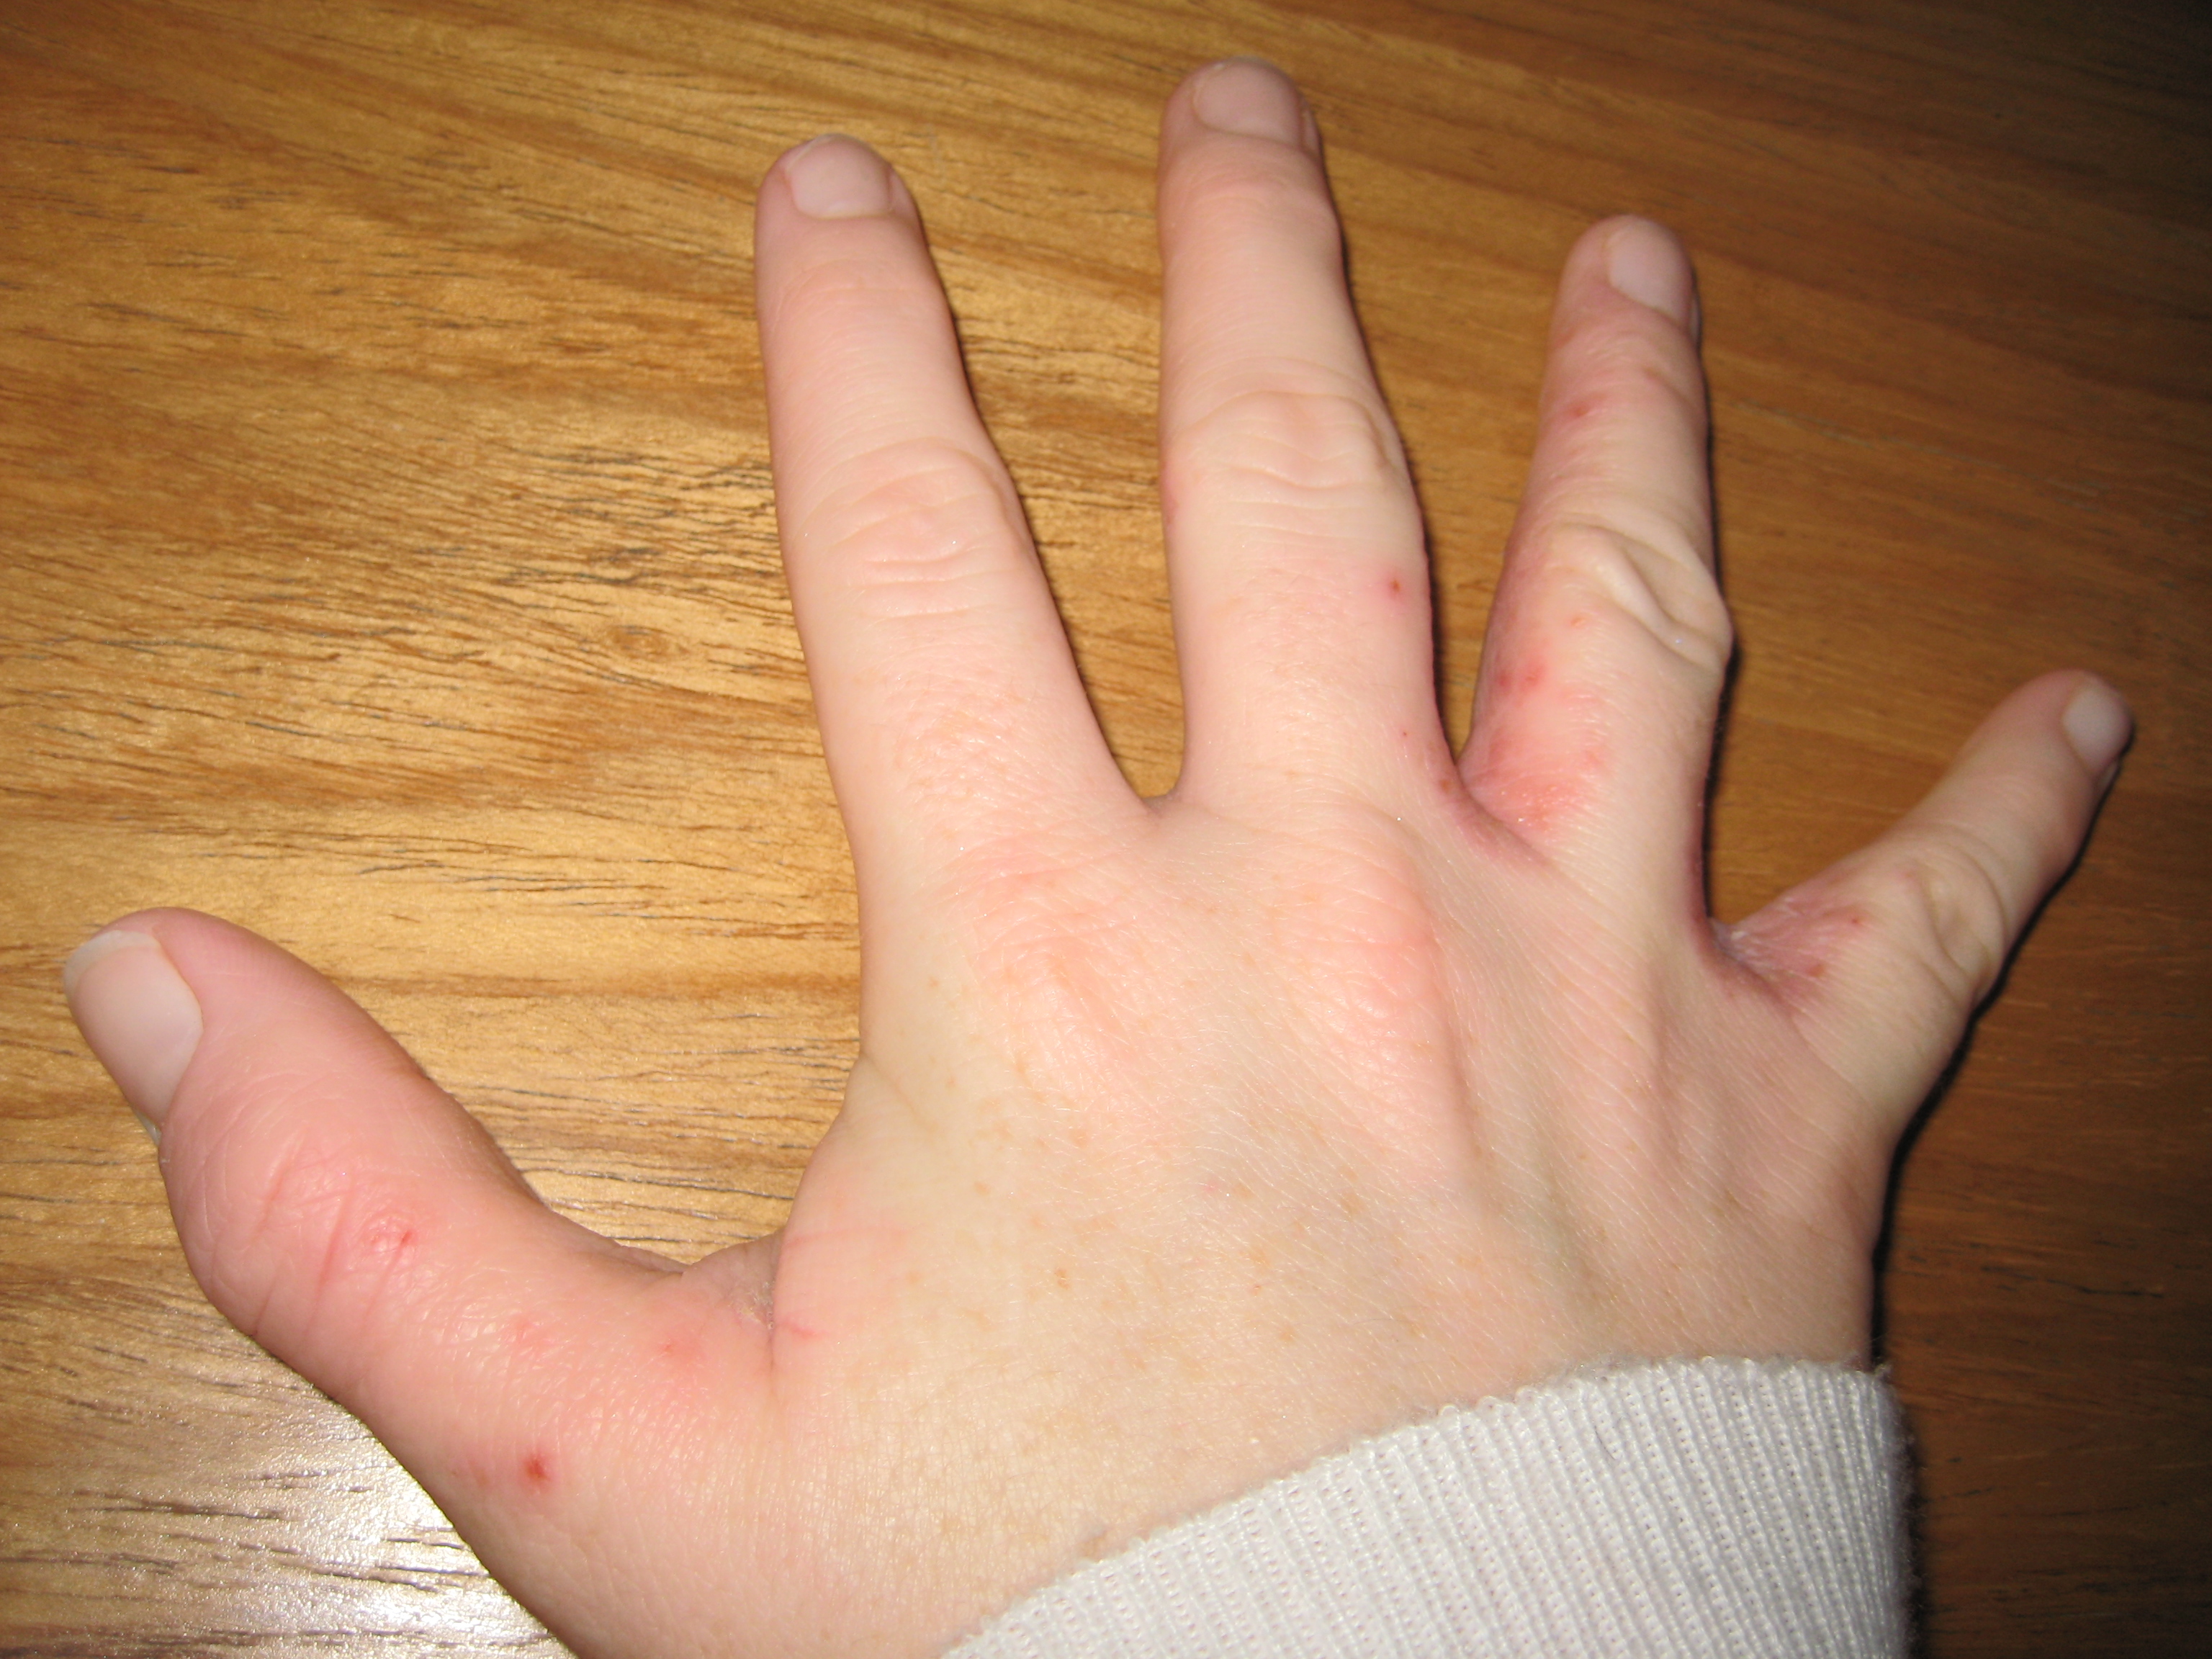 Red spots and Skin rash: Common Related Medical Conditions